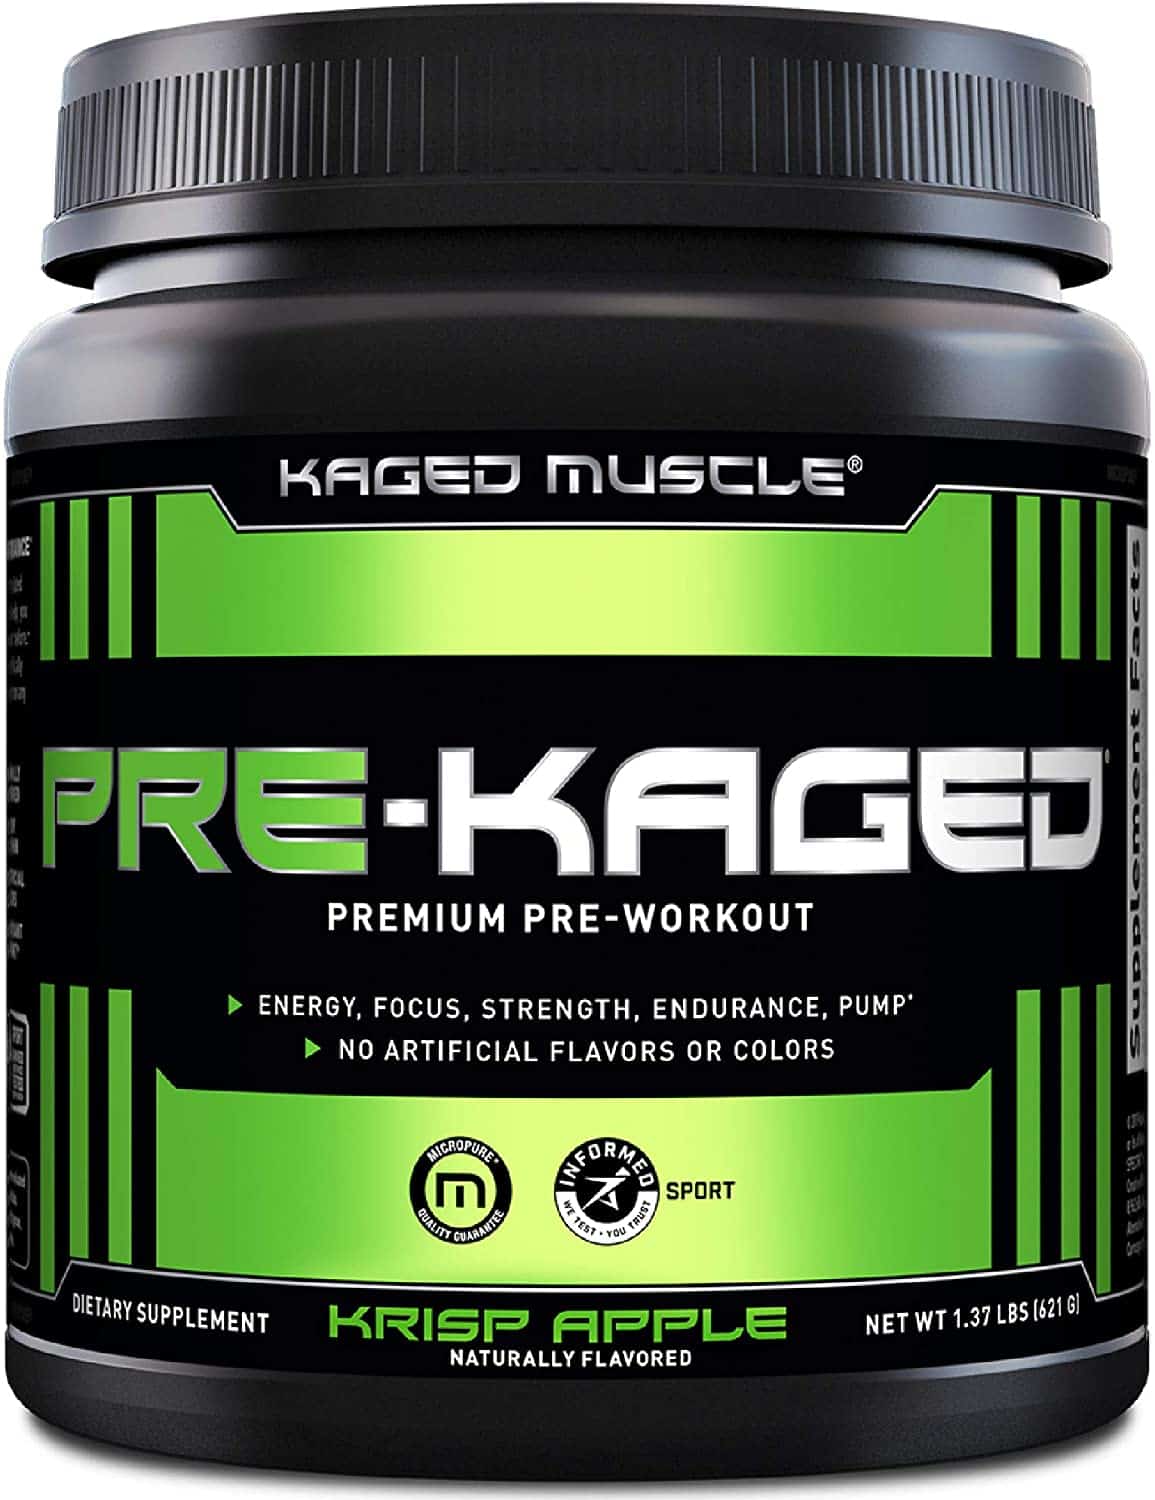 KAGED MUSCLE PRE-KAGED